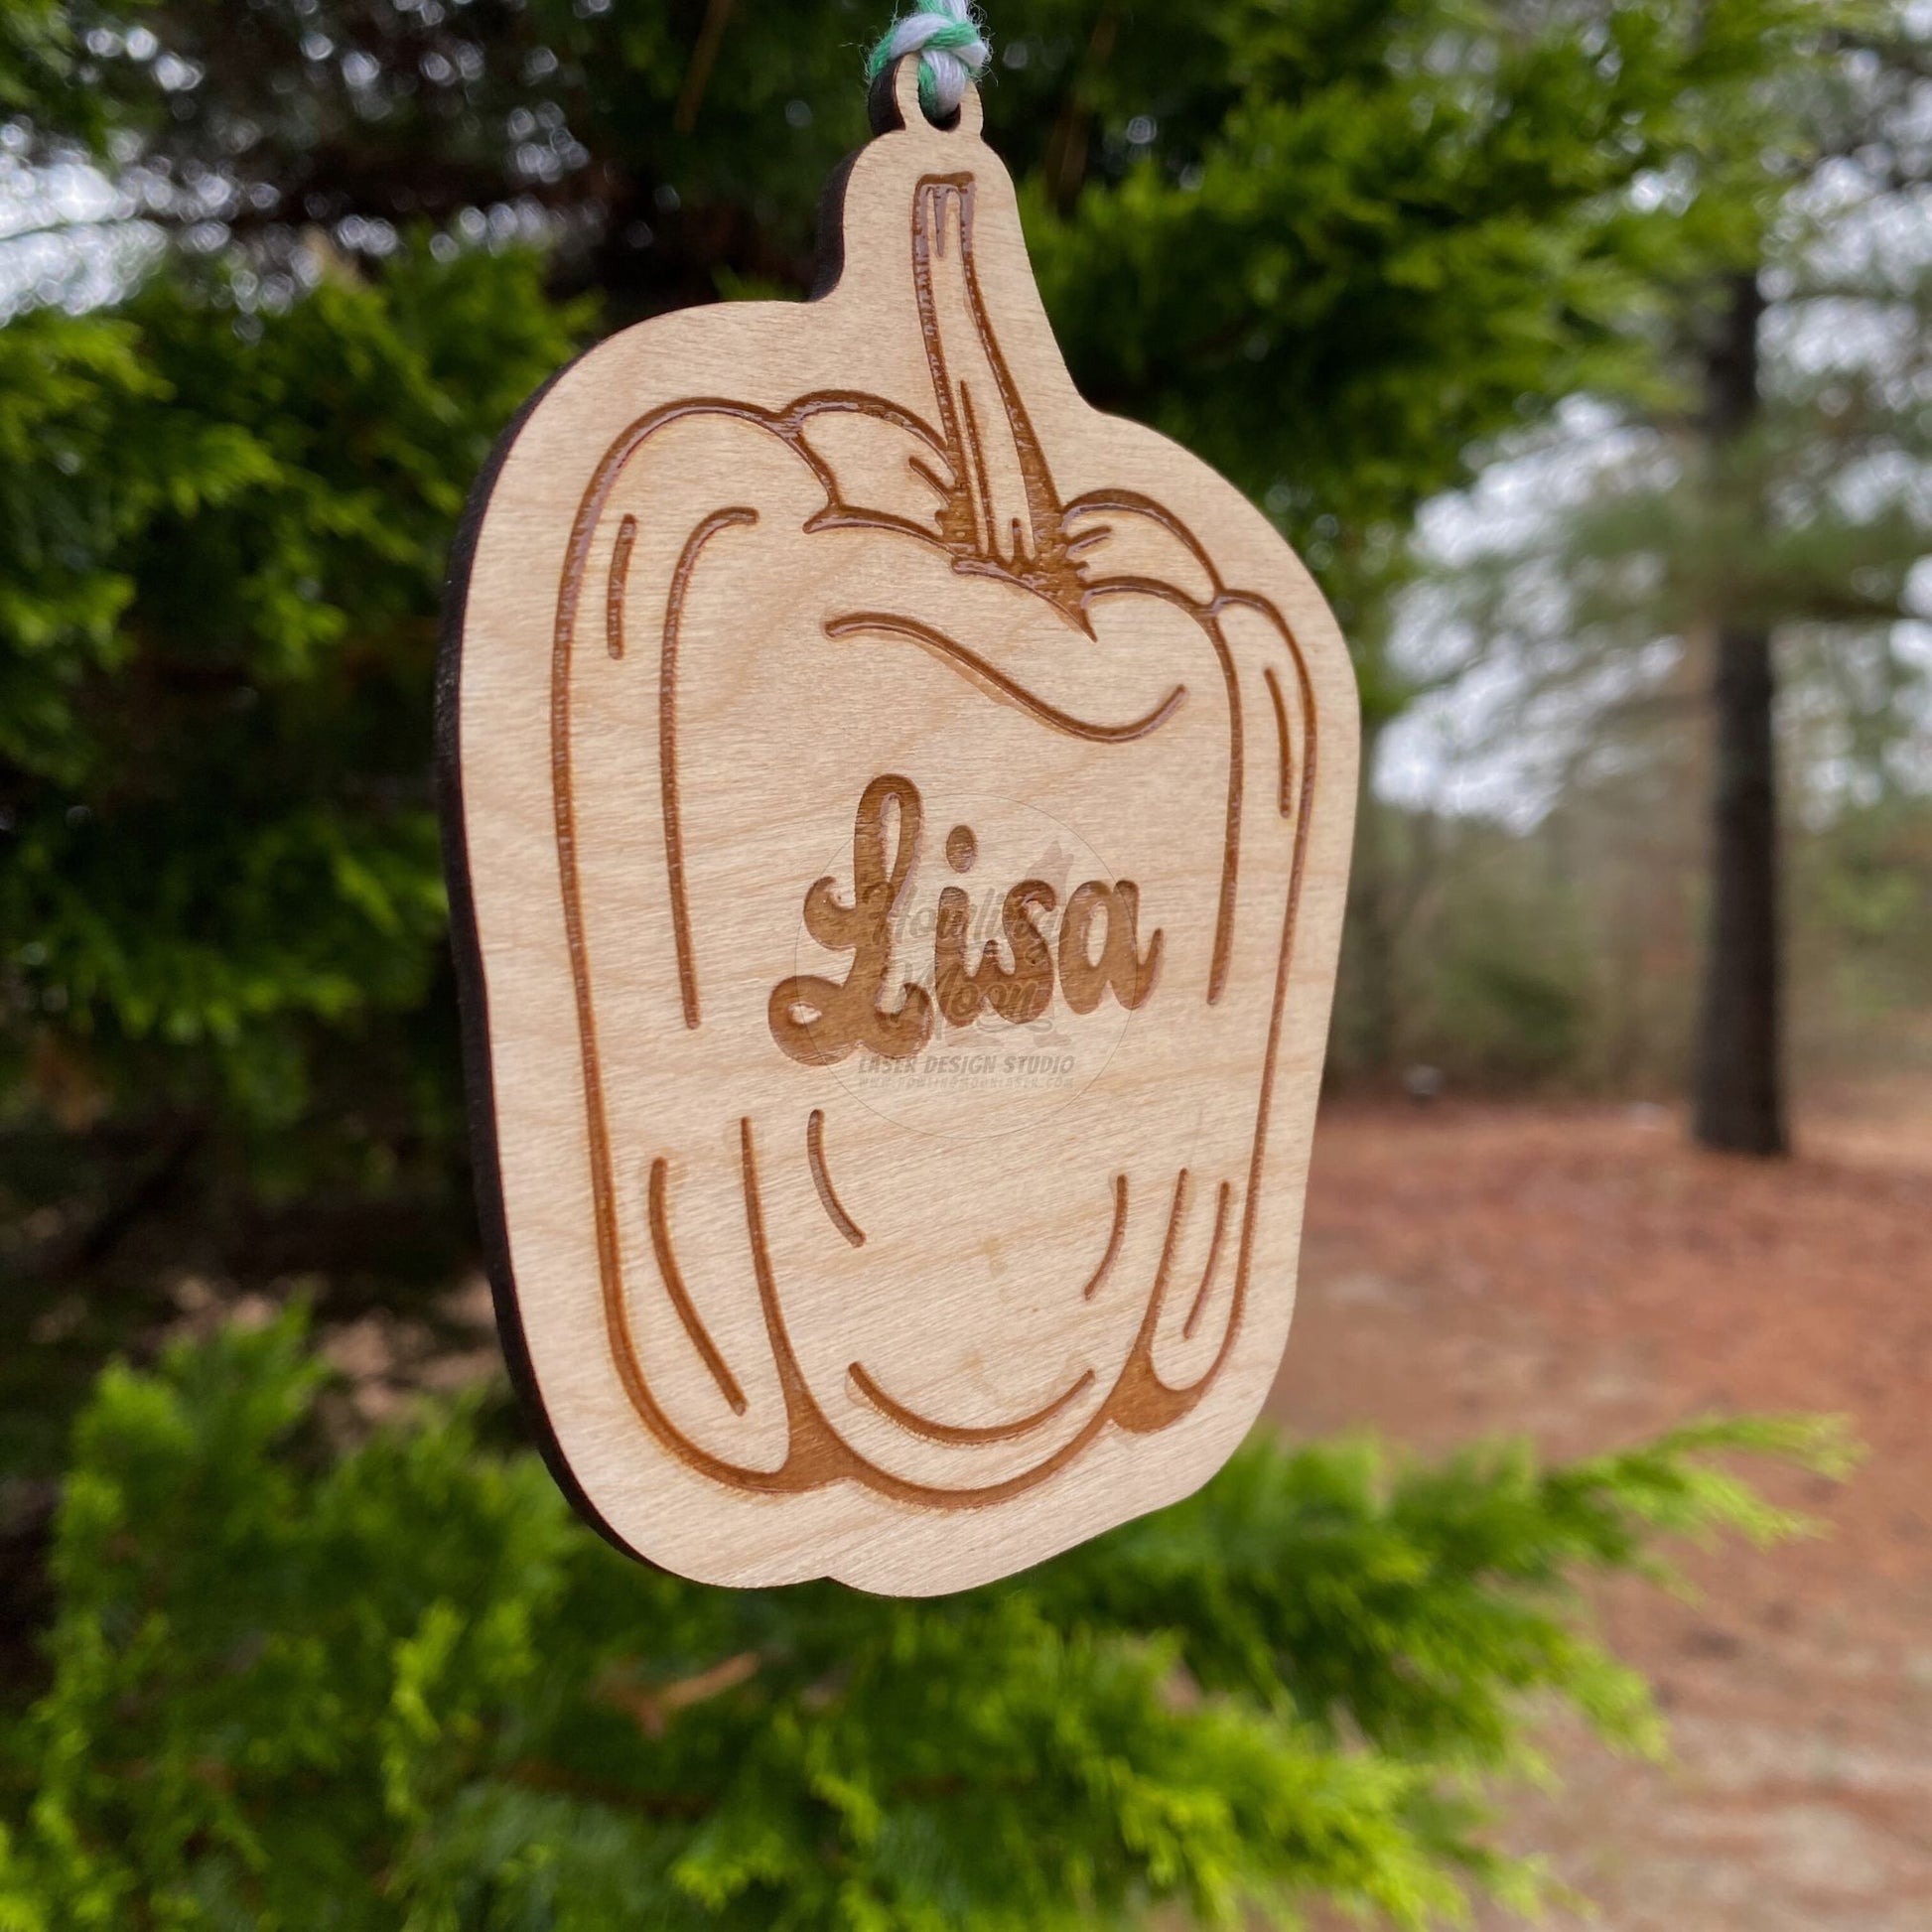 Side view of Personalized bell pepper ornaments handcrafted from natural wood made in Virginia USA by Howling Moon Laser Design Studio.